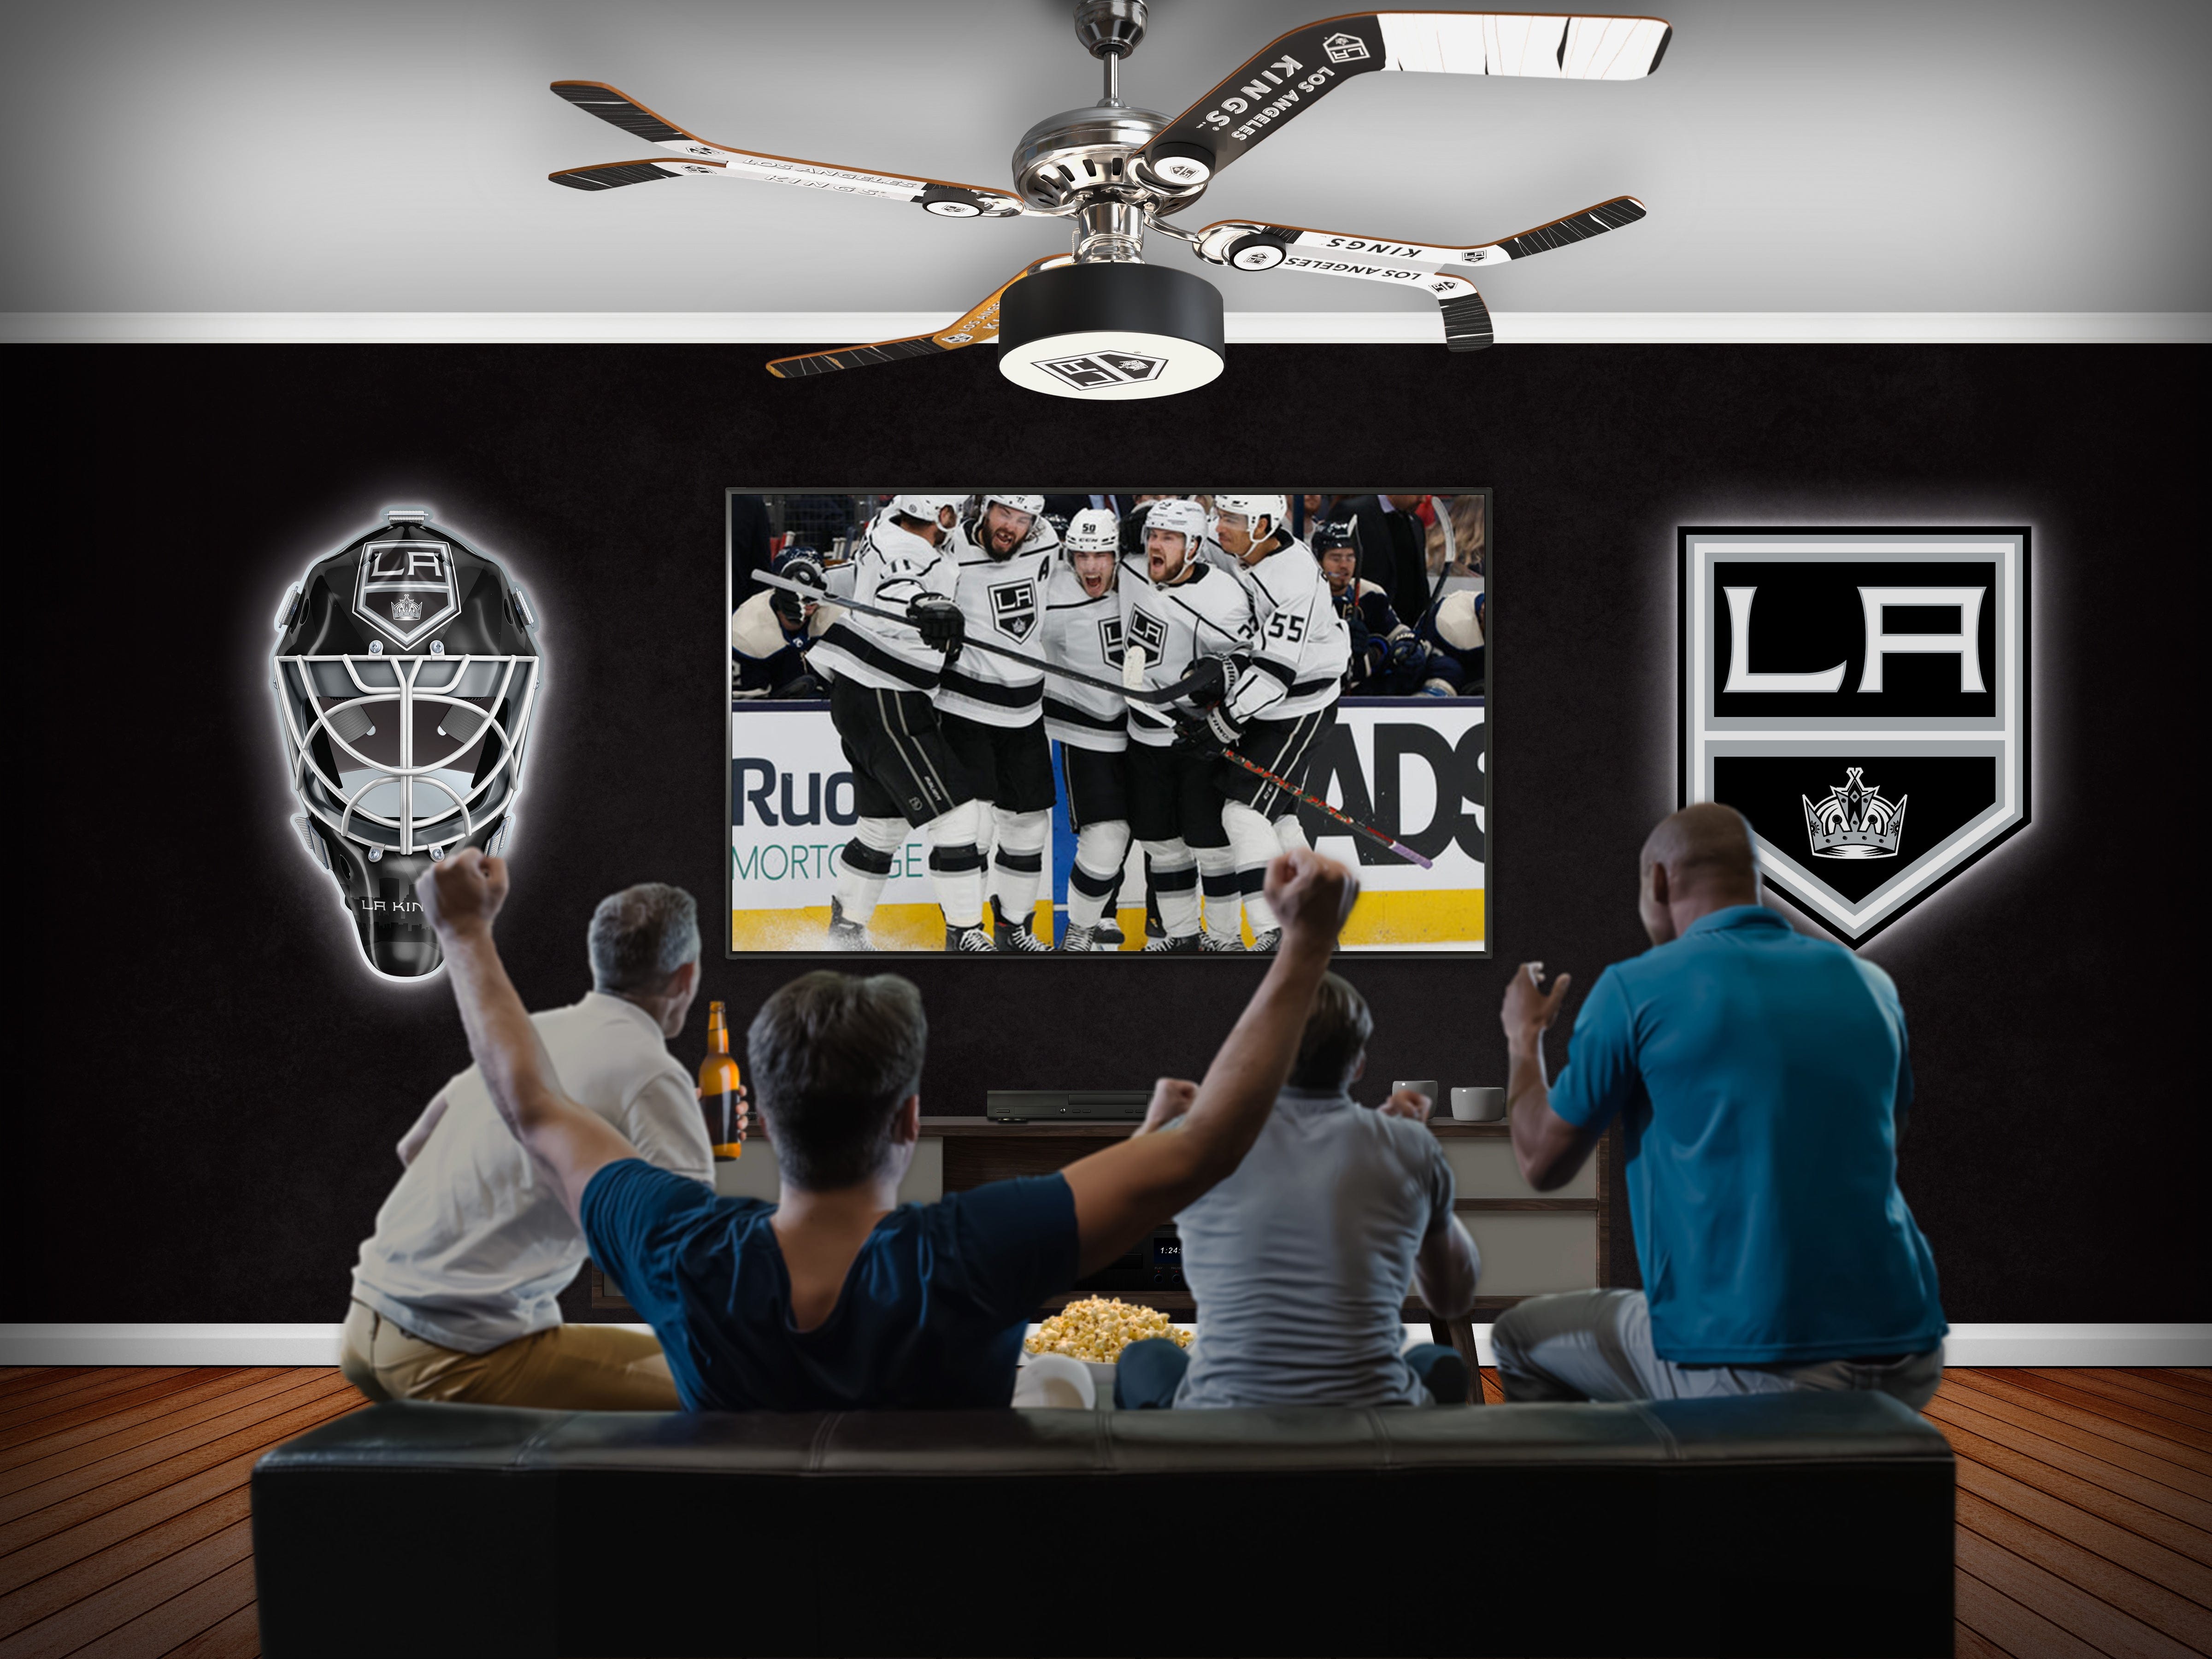 Los Angeles Kings V New Jersey Devils - Canvas Print